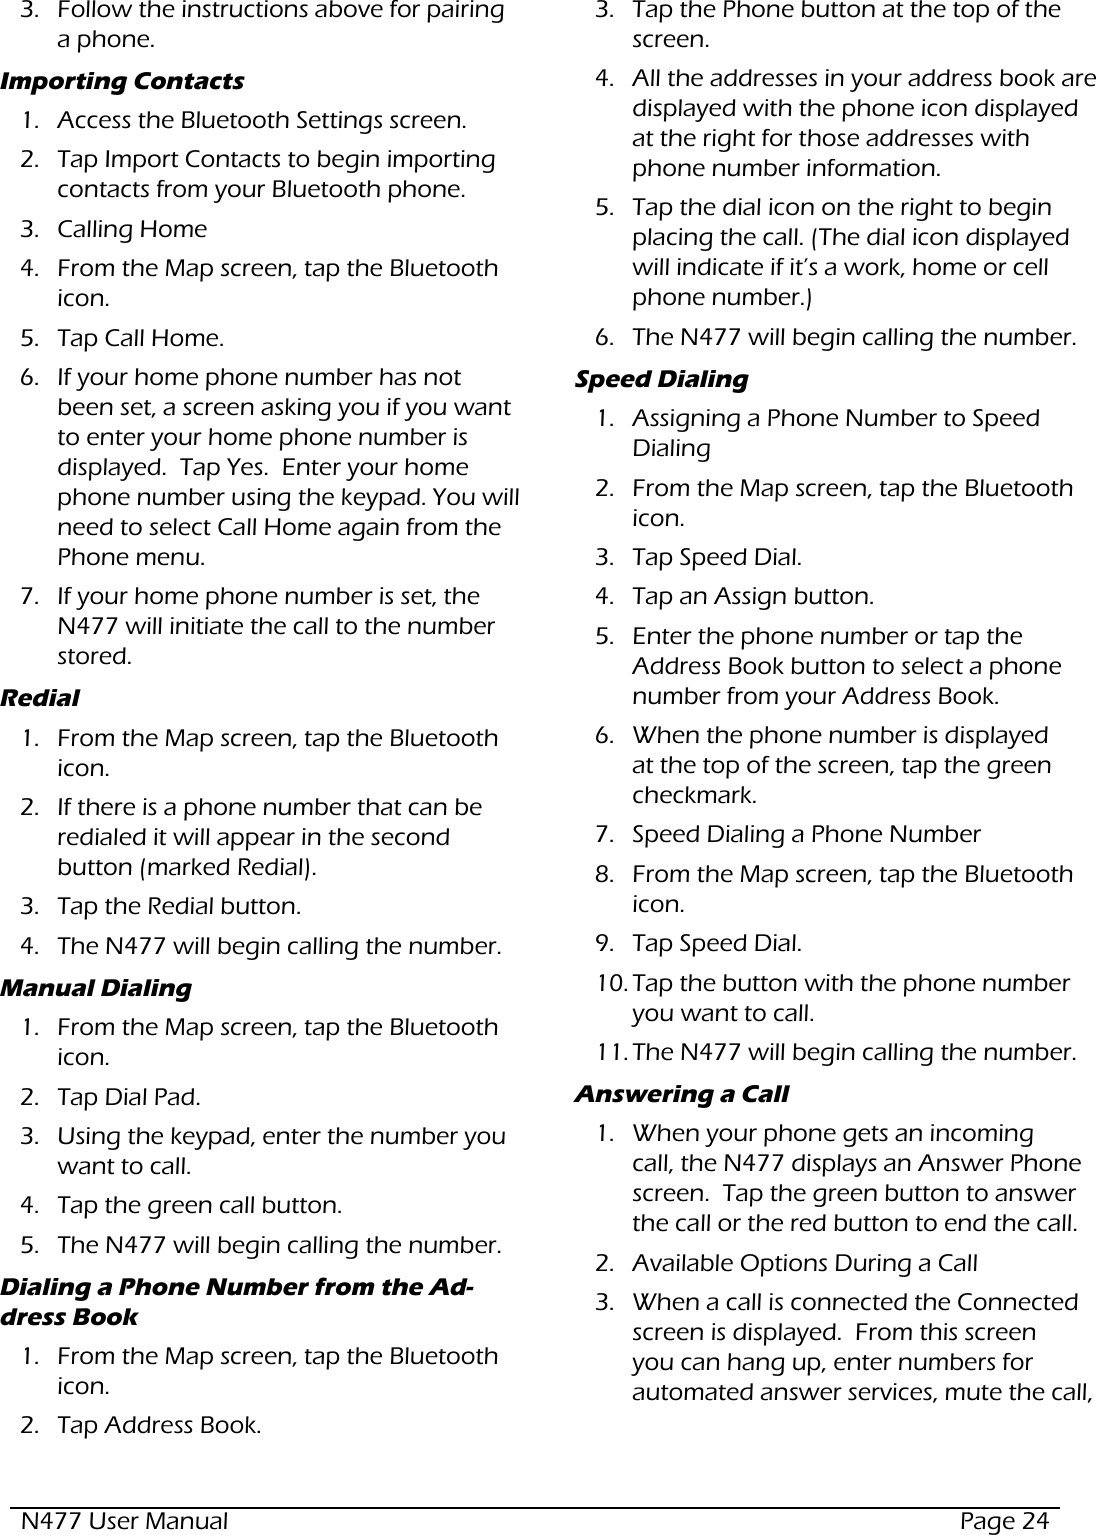 N477 User Manual  Page 243.  Follow the instructions above for pairing a phone.Importing Contacts1.  Access the Bluetooth Settings screen.2.  Tap Import Contacts to begin importing contacts from your Bluetooth phone.3.  Calling Home4.  From the Map screen, tap the Bluetooth icon.5.  Tap Call Home.6.  If your home phone number has not been set, a screen asking you if you want to enter your home phone number is displayed.  Tap Yes.  Enter your home phone number using the keypad. You will need to select Call Home again from the Phone menu.7.  If your home phone number is set, the N477 will initiate the call to the number stored.Redial1.  From the Map screen, tap the Bluetooth icon.2.  If there is a phone number that can be redialed it will appear in the second button (marked Redial).3.  Tap the Redial button.4.  The N477 will begin calling the number.Manual Dialing1.  From the Map screen, tap the Bluetooth icon.2.  Tap Dial Pad.3.  Using the keypad, enter the number you want to call.4.  Tap the green call button.5.  The N477 will begin calling the number.Dialing a Phone Number from the Ad-dress Book1.  From the Map screen, tap the Bluetooth icon.2.  Tap Address Book.3.  Tap the Phone button at the top of the screen.4.  All the addresses in your address book are displayed with the phone icon displayed at the right for those addresses with phone number information.5.  Tap the dial icon on the right to begin placing the call. (The dial icon displayed will indicate if it’s a work, home or cell phone number.)6.  The N477 will begin calling the number.Speed Dialing1.  Assigning a Phone Number to Speed Dialing2.  From the Map screen, tap the Bluetooth icon.3.  Tap Speed Dial.4.  Tap an Assign button.5.  Enter the phone number or tap the Address Book button to select a phone number from your Address Book.6.  When the phone number is displayed at the top of the screen, tap the green checkmark.7.  Speed Dialing a Phone Number8.  From the Map screen, tap the Bluetooth icon.9.  Tap Speed Dial.10. Tap the button with the phone number you want to call.11. The N477 will begin calling the number.Answering a Call1.  When your phone gets an incoming call, the N477 displays an Answer Phone screen.  Tap the green button to answer the call or the red button to end the call.2.  Available Options During a Call3.  When a call is connected the Connected screen is displayed.  From this screen you can hang up, enter numbers for automated answer services, mute the call, 